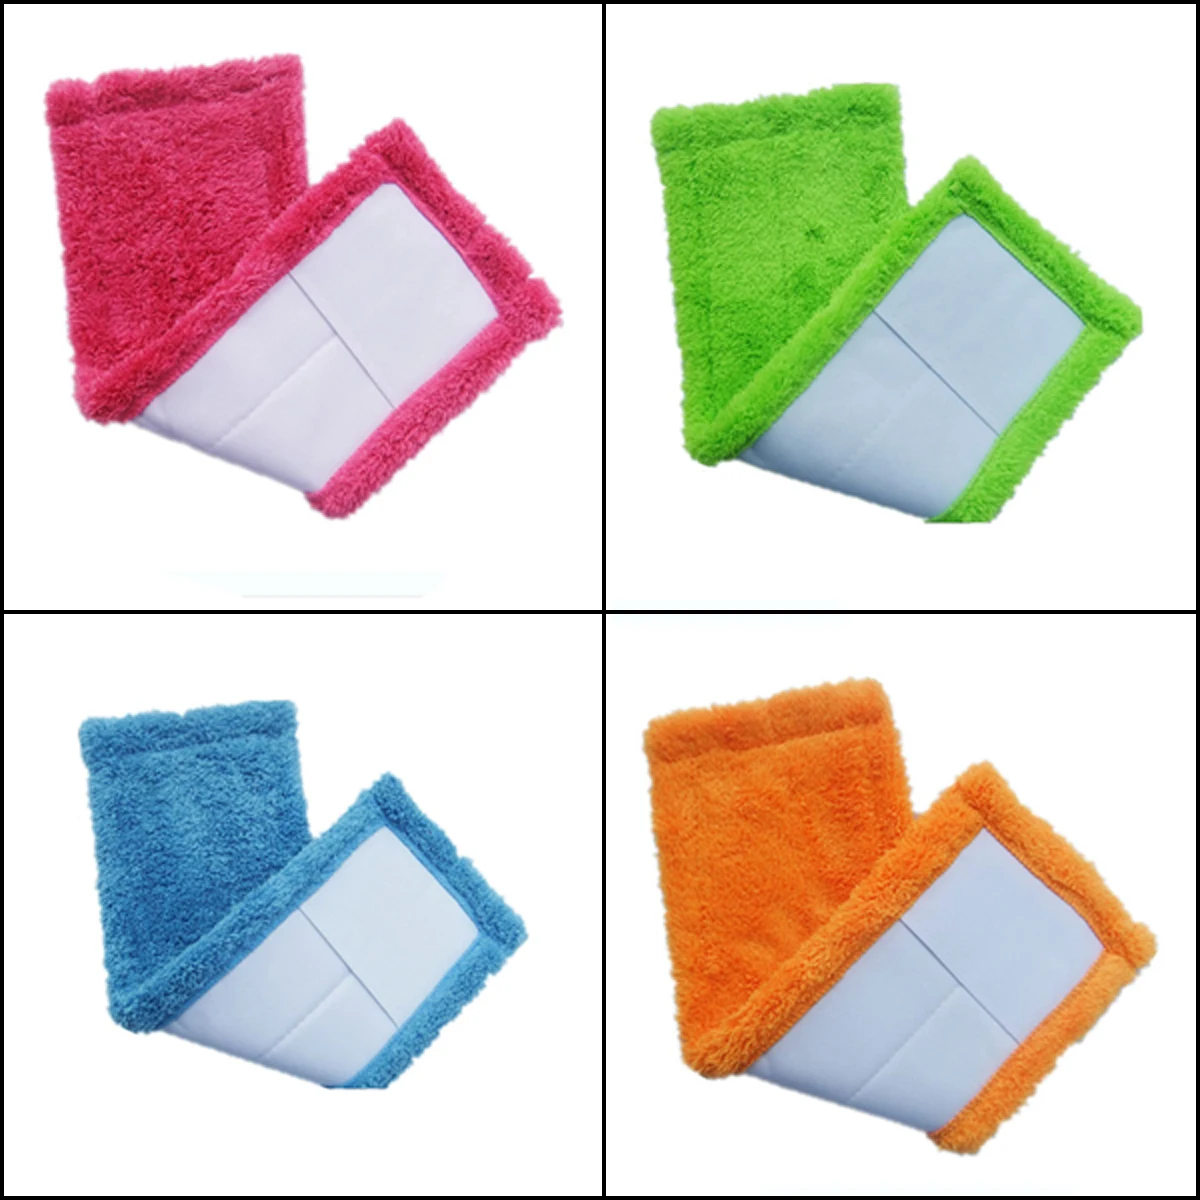 Mops Wet And Dry Replacement Mop Head Washable Microfiber Cleaning Mop Pads